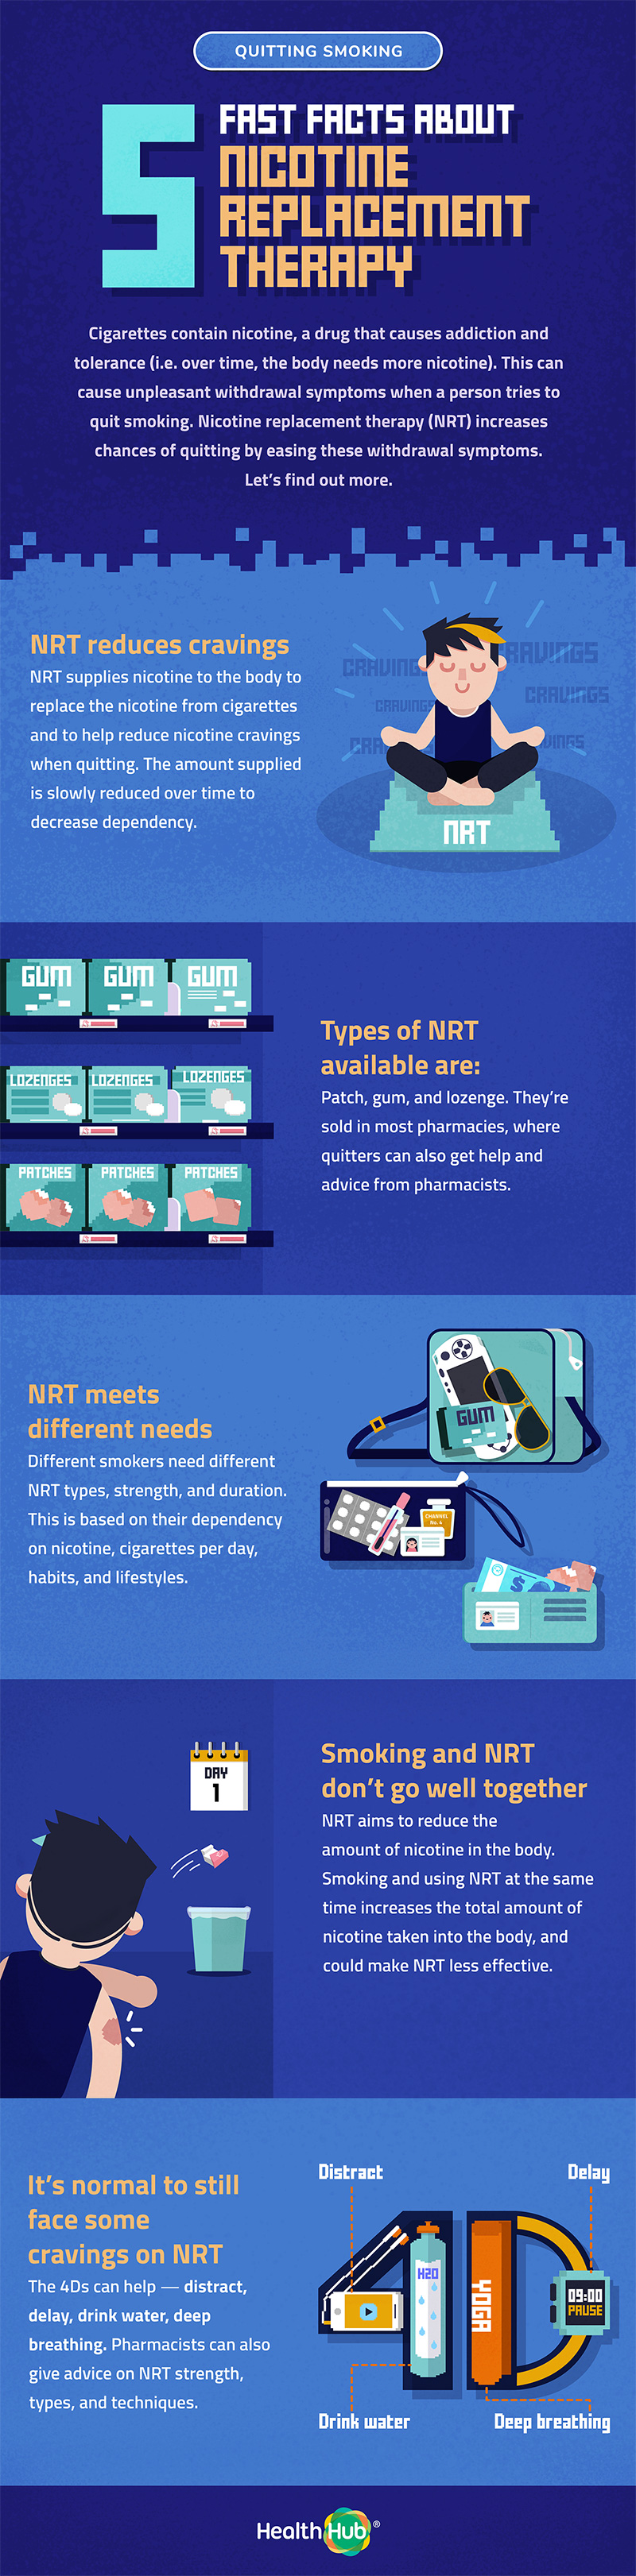 Quit smoking made easier with Nicotine Replacement Therapy (NRT)